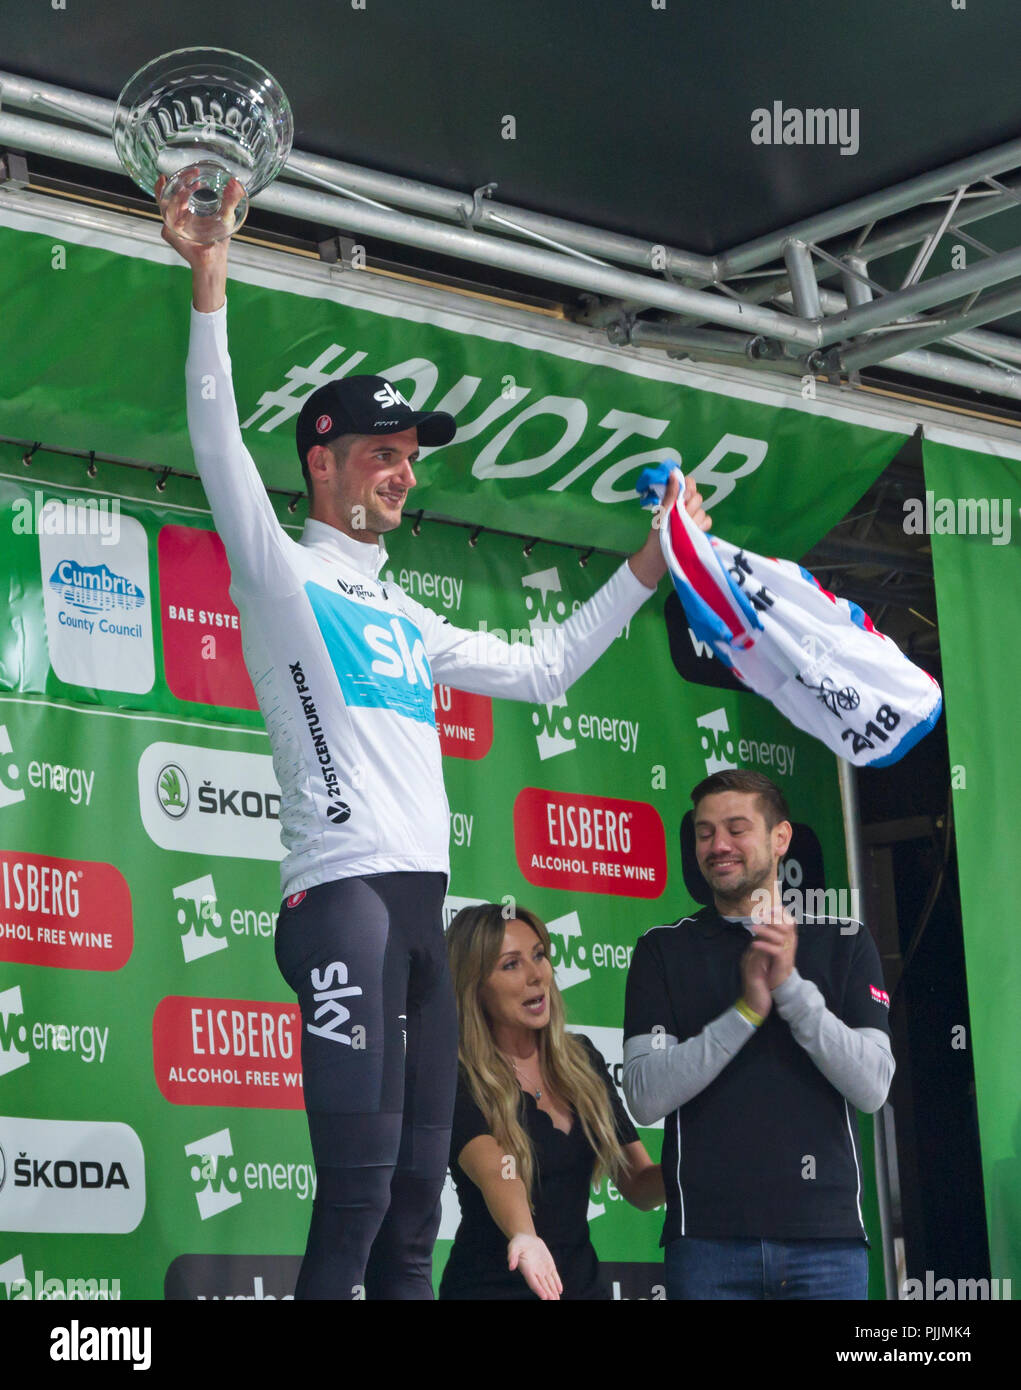 Whinlatter, Cumbria, UK. 7th September 2018. Stage  6, Tour of Britain, 7 September 2018. The winner of the stage, which finished at Whinlatter Visitor Centre after the second of two gruelling ascents of Whinlatter Pass, was Wout Poels of Team Sky, seen here on the Podium receiving his award and winner's jersey. Credit: Julie Fryer/Alamy Live News Stock Photo